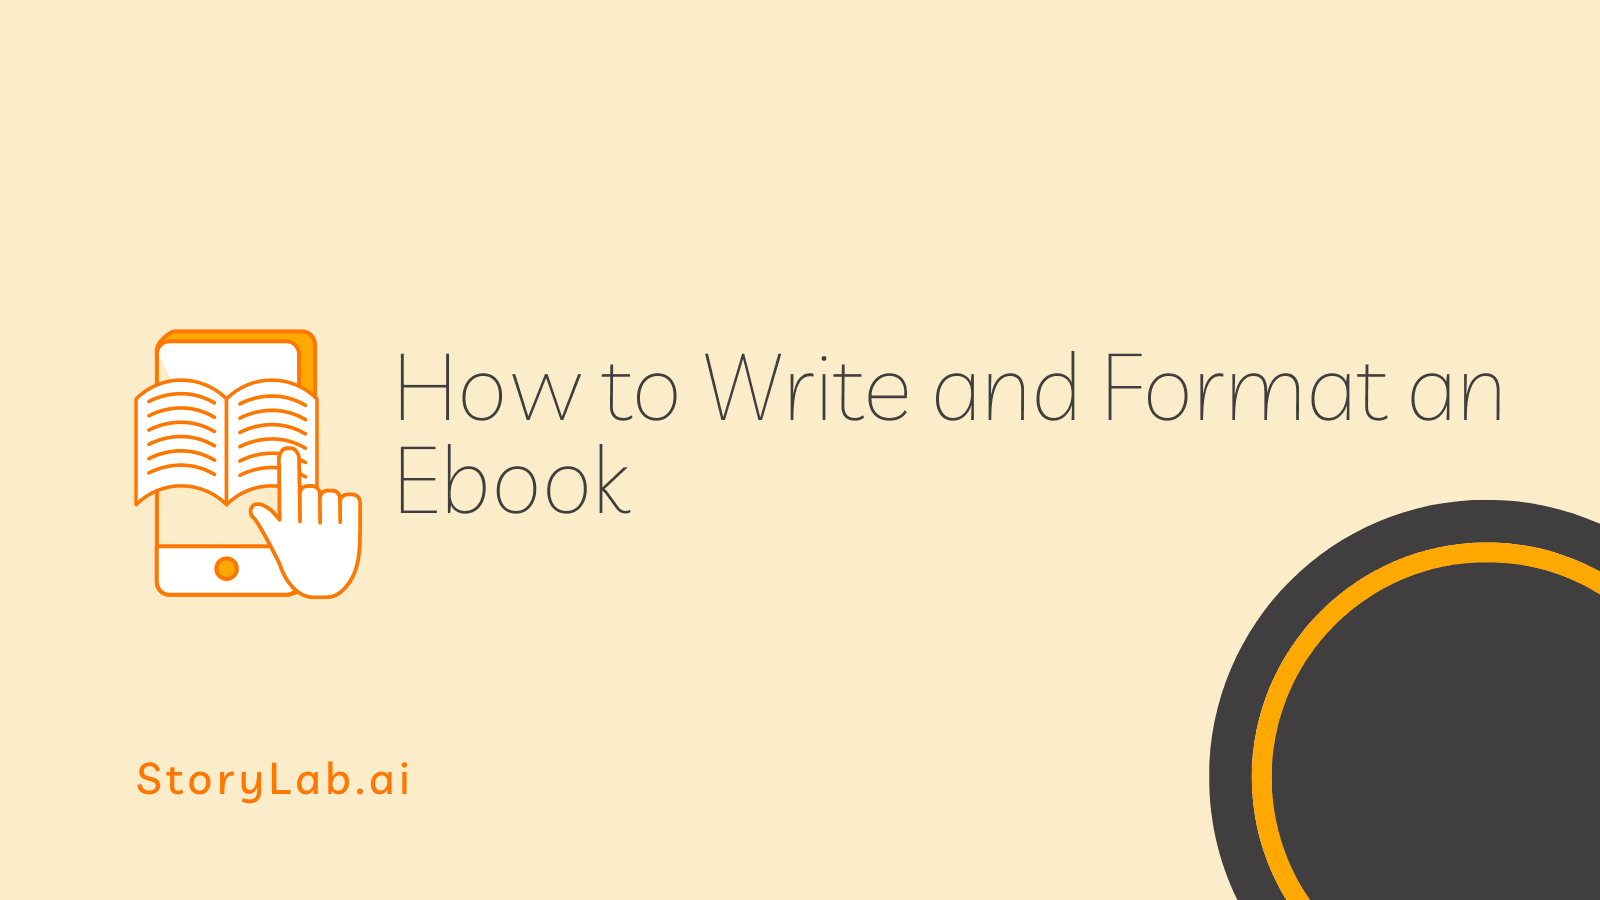 How to Write and Format an Ebook